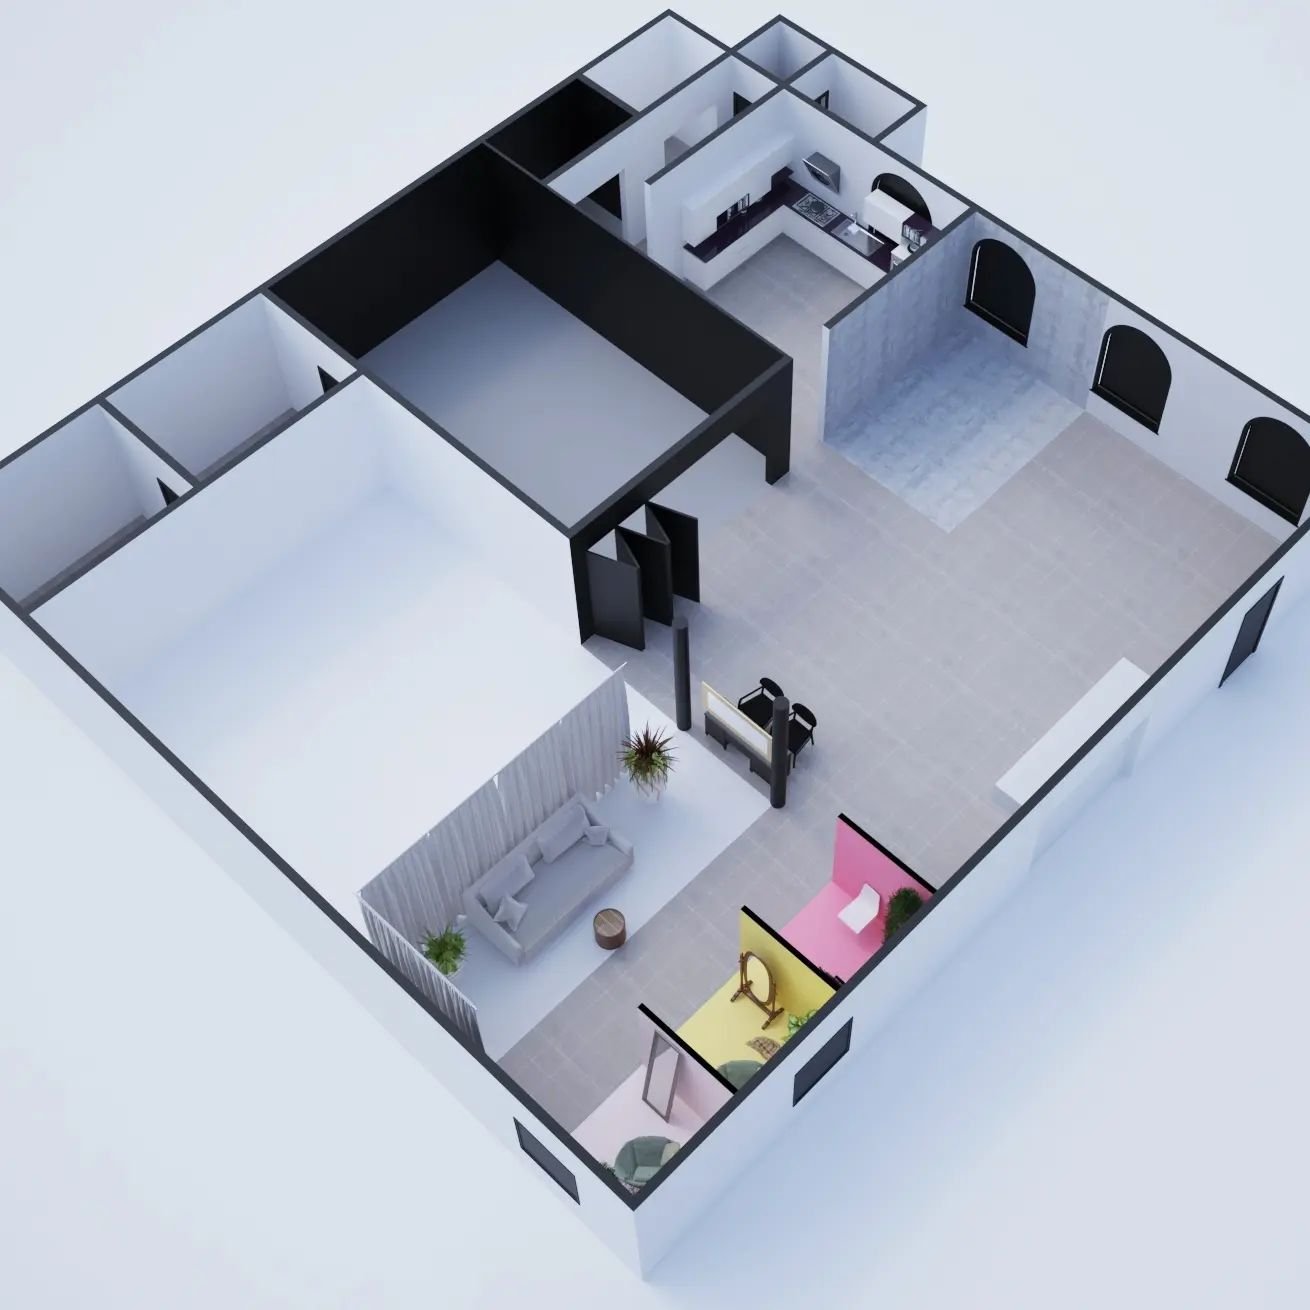 FLOOR PLAN

XL STUDIO INCLUDE:

7M X 6.7M COVE
5M X 7.5M BLACKOUT ROOM 
INDUSTRIAL SPACE
CORNER SPACE

---------------------------------
NO PART OF XL BUT CAN BE ADDED:

HOLLYWOOD STUDIO 
DOVE SPACE

----------------------

2 SEATERS MUA STATION
2X C